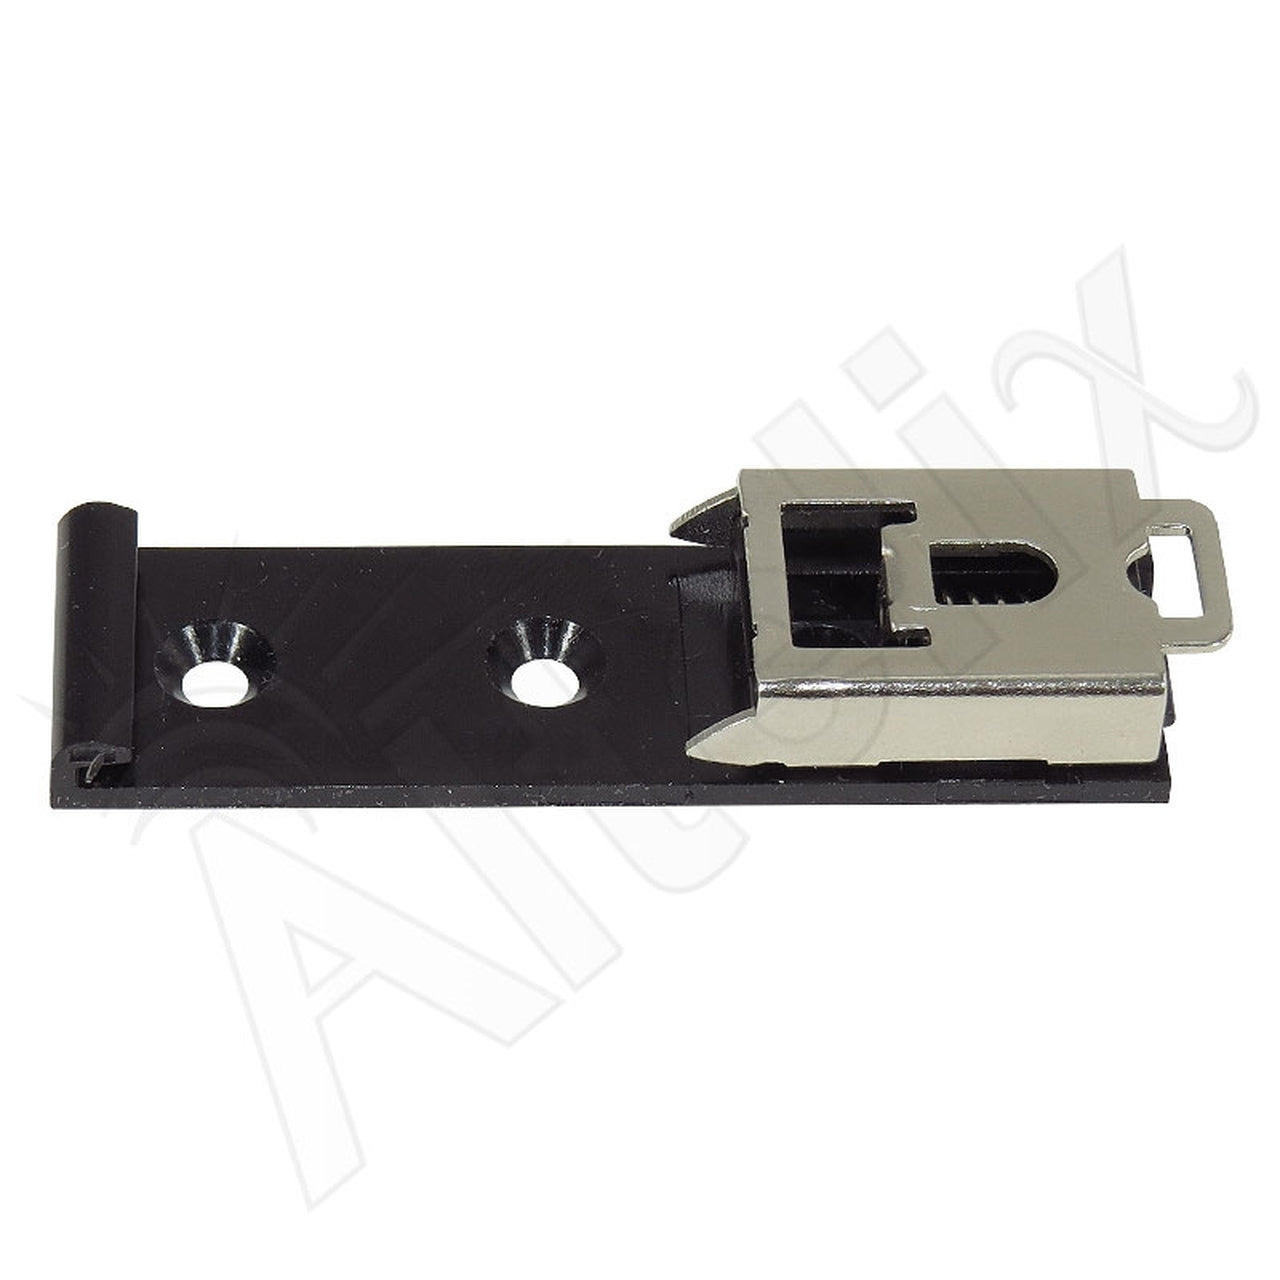 18mm Wide Spring-Loaded Clamp Type DIN Rail Mounting Clip for 35mm Top Hat Rail - 0